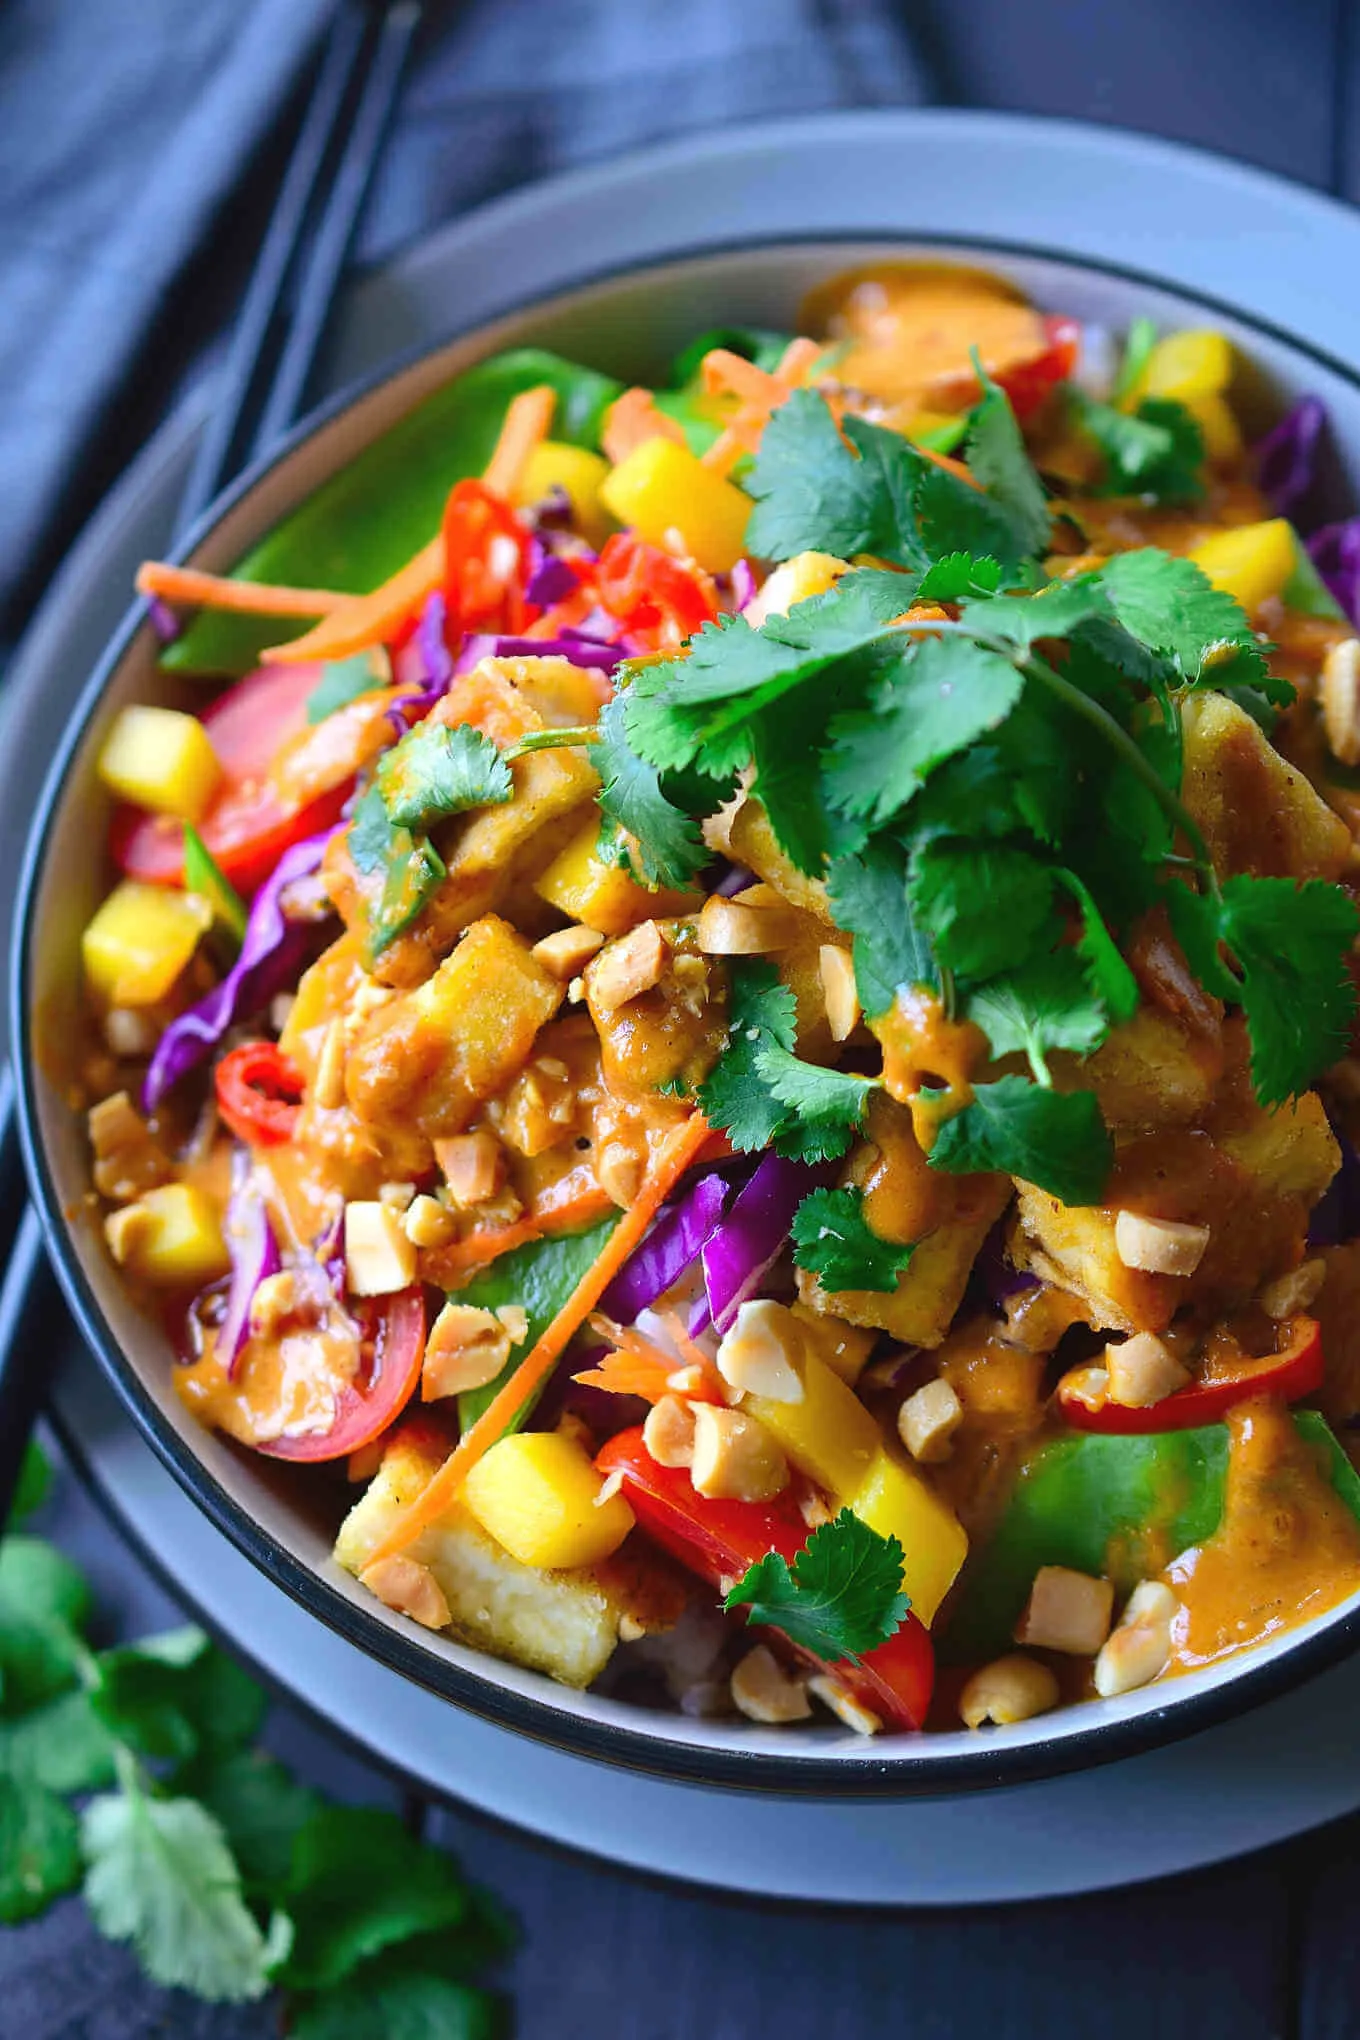 A colorful corn salad called a buddha bowl sitting in a blue bowl.